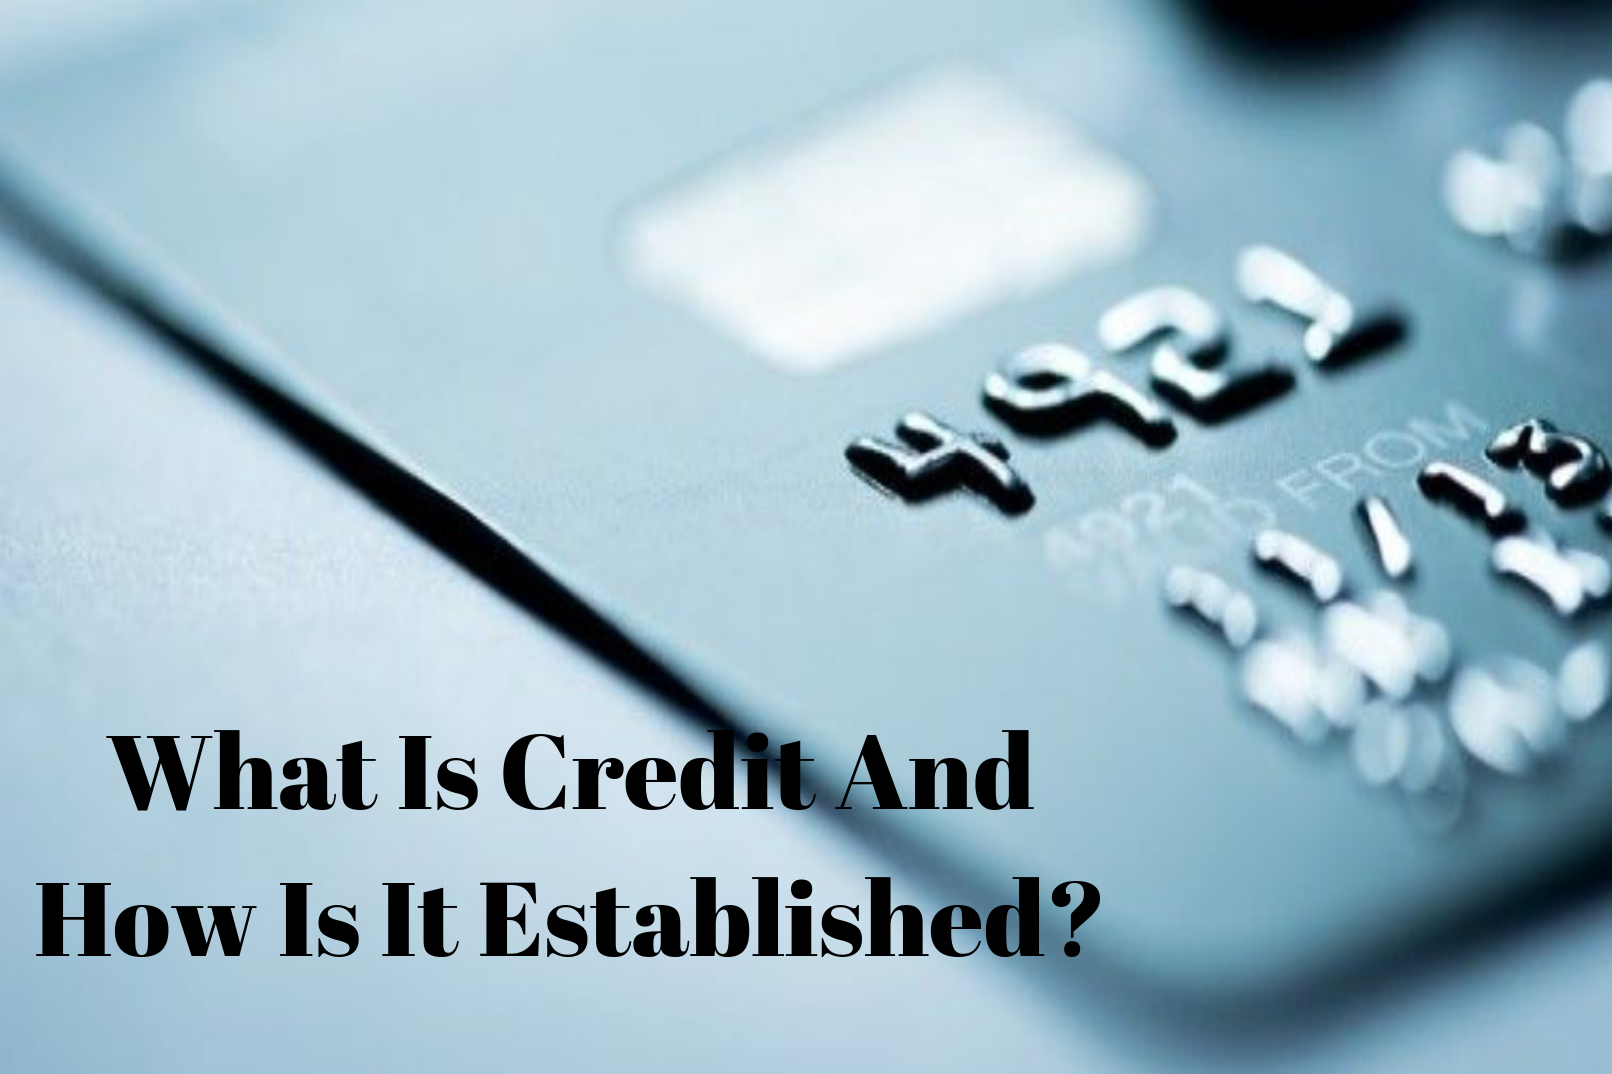 What Is Credit And How Is It Established?